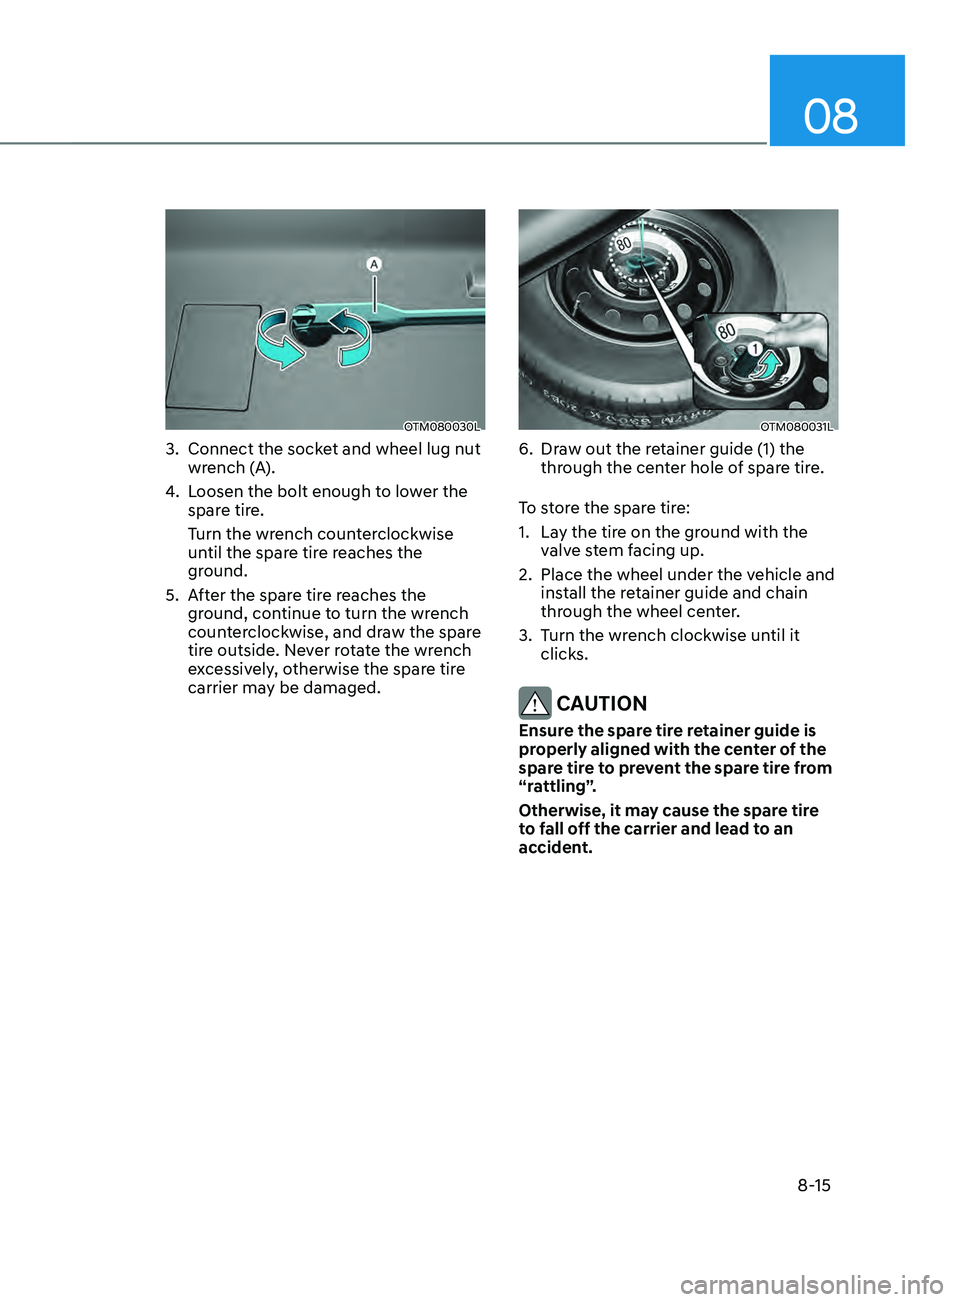 HYUNDAI SANTA FE CALLIGRAPHY 2021  Owners Manual 08
8-15
OTM080030L
3. Connect the socket and wheel lug nut 
wrench (A).
4.
 Loosen the bolt enough t

o lower the 
spare tire.
Turn the wrench counterclockwise 
until the spare tire reaches the 
groun